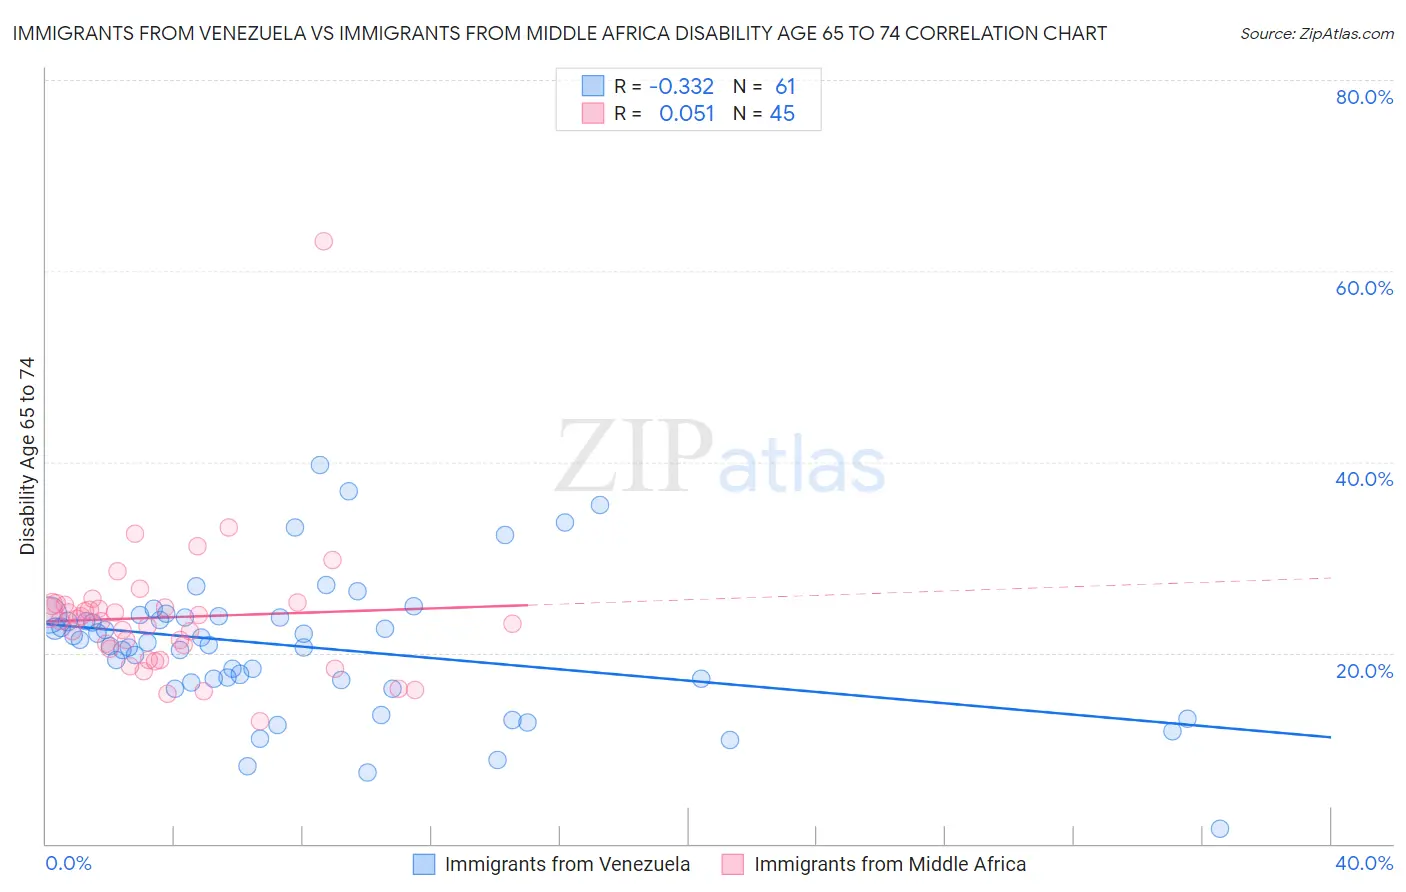 Immigrants from Venezuela vs Immigrants from Middle Africa Disability Age 65 to 74